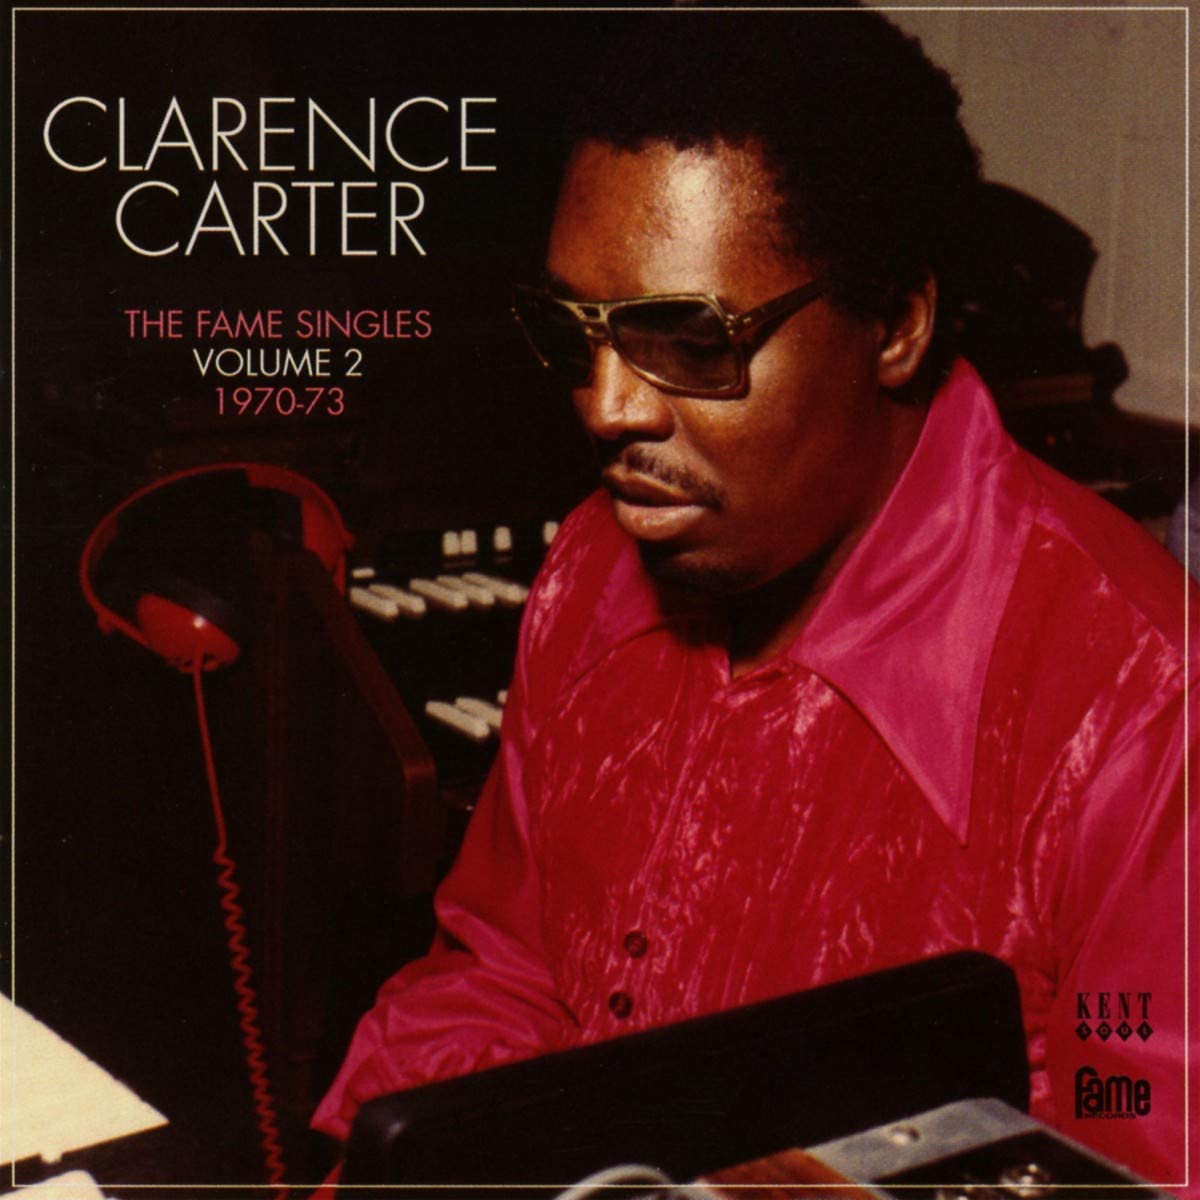 Clarence Carter - The Fame Singles Vol. 2 - CD